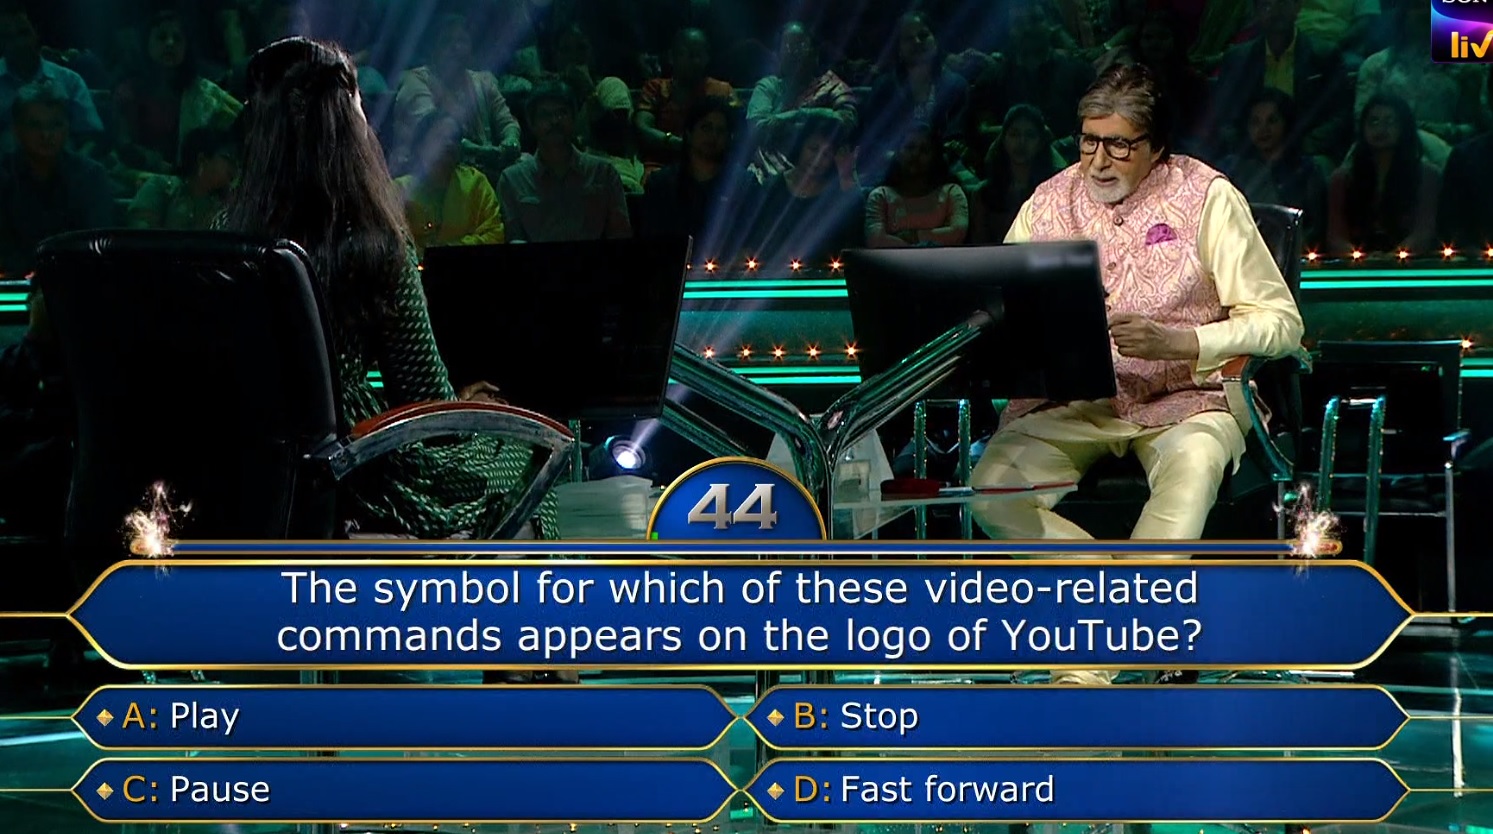 Ques : The symbol for which of these video-related commands appears on the logo of YouTube?